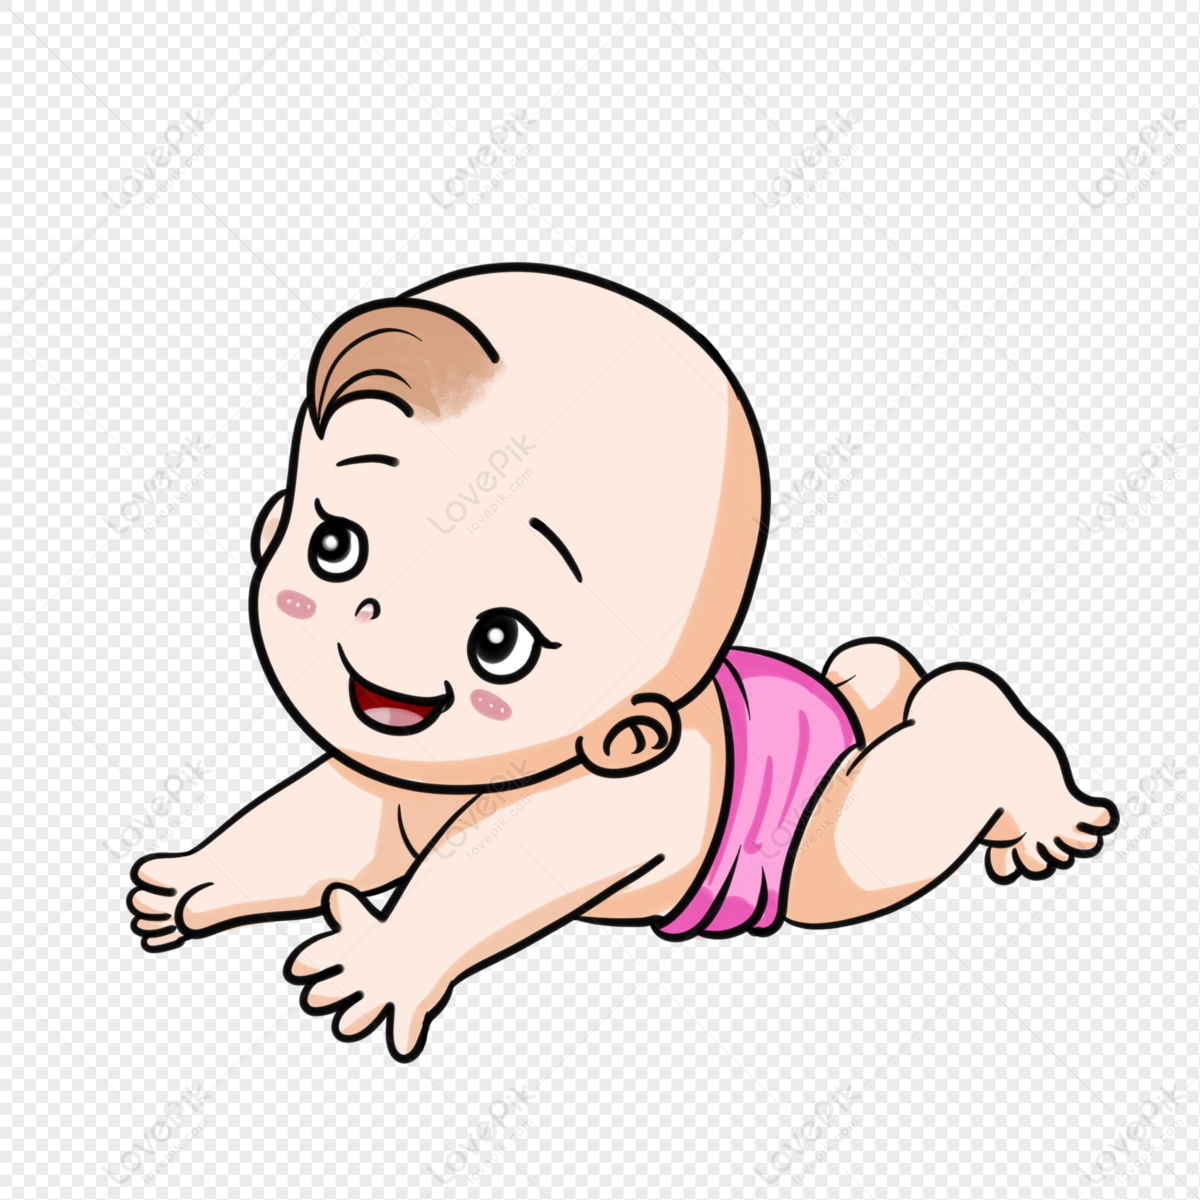 Crawling Little Baby PNG Picture And Clipart Image For Free Download -  Lovepik | 401550155